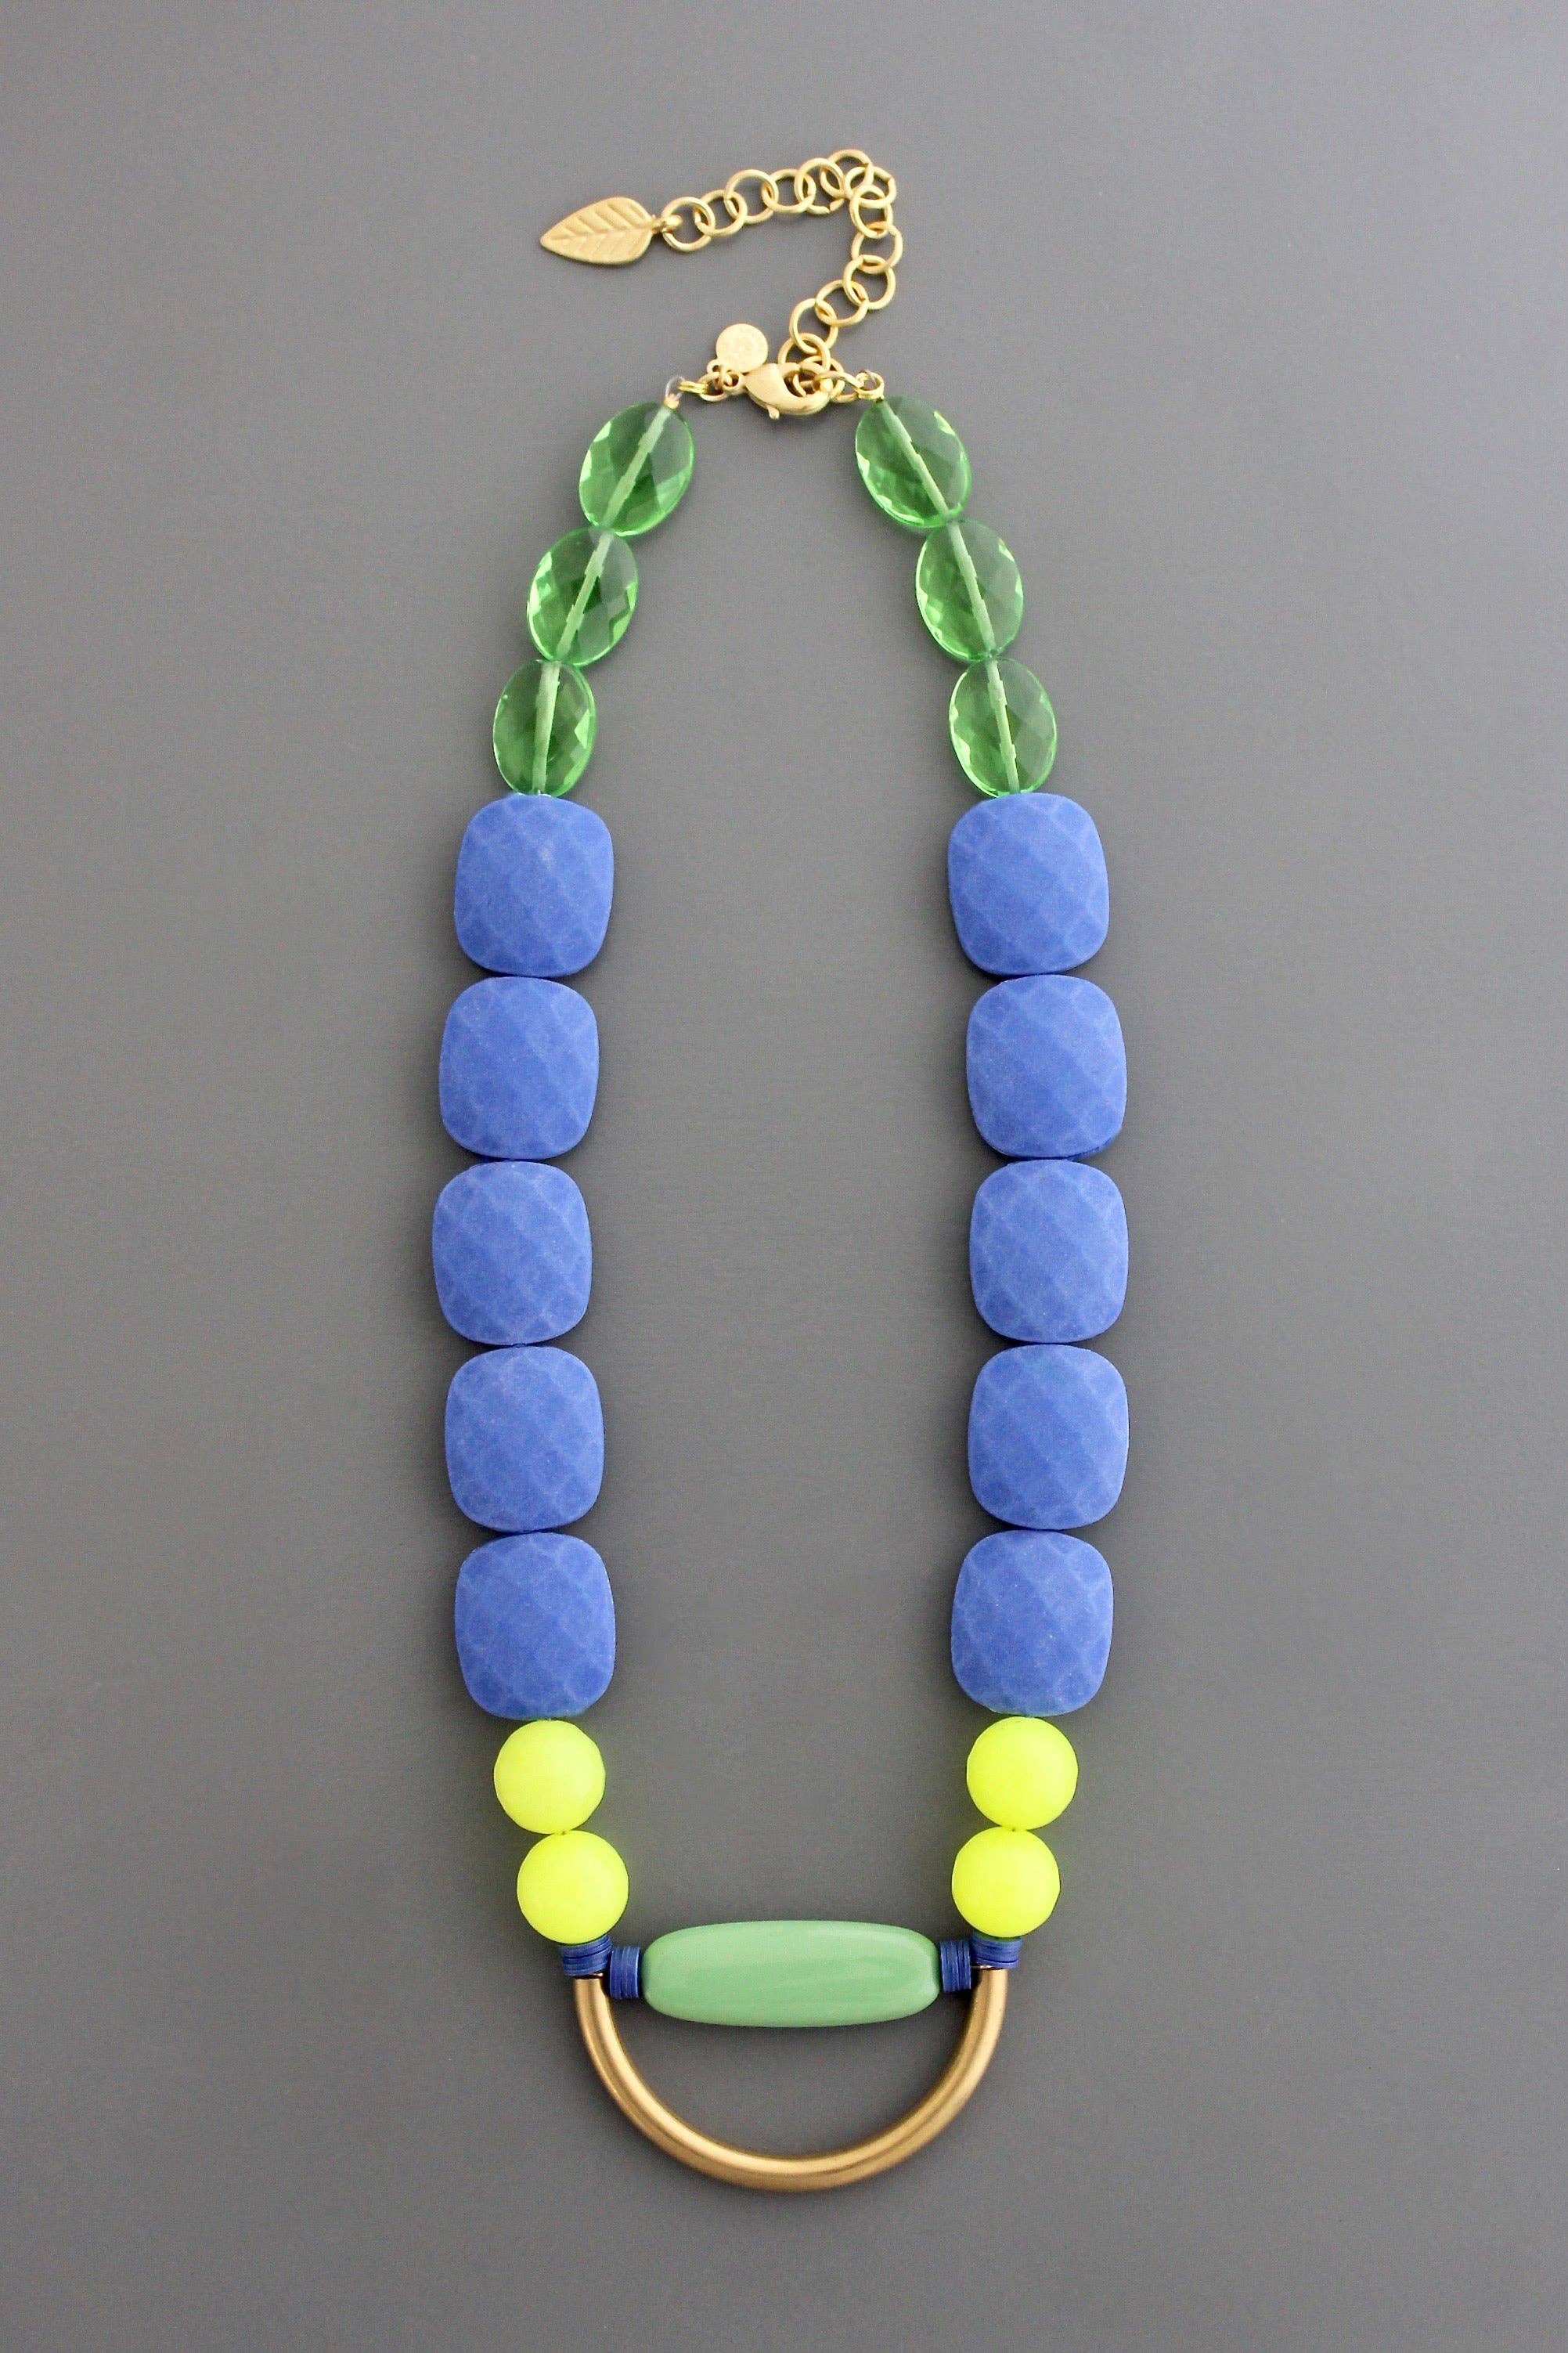 Geometric blue, green, and yellow necklace - Havlan & West